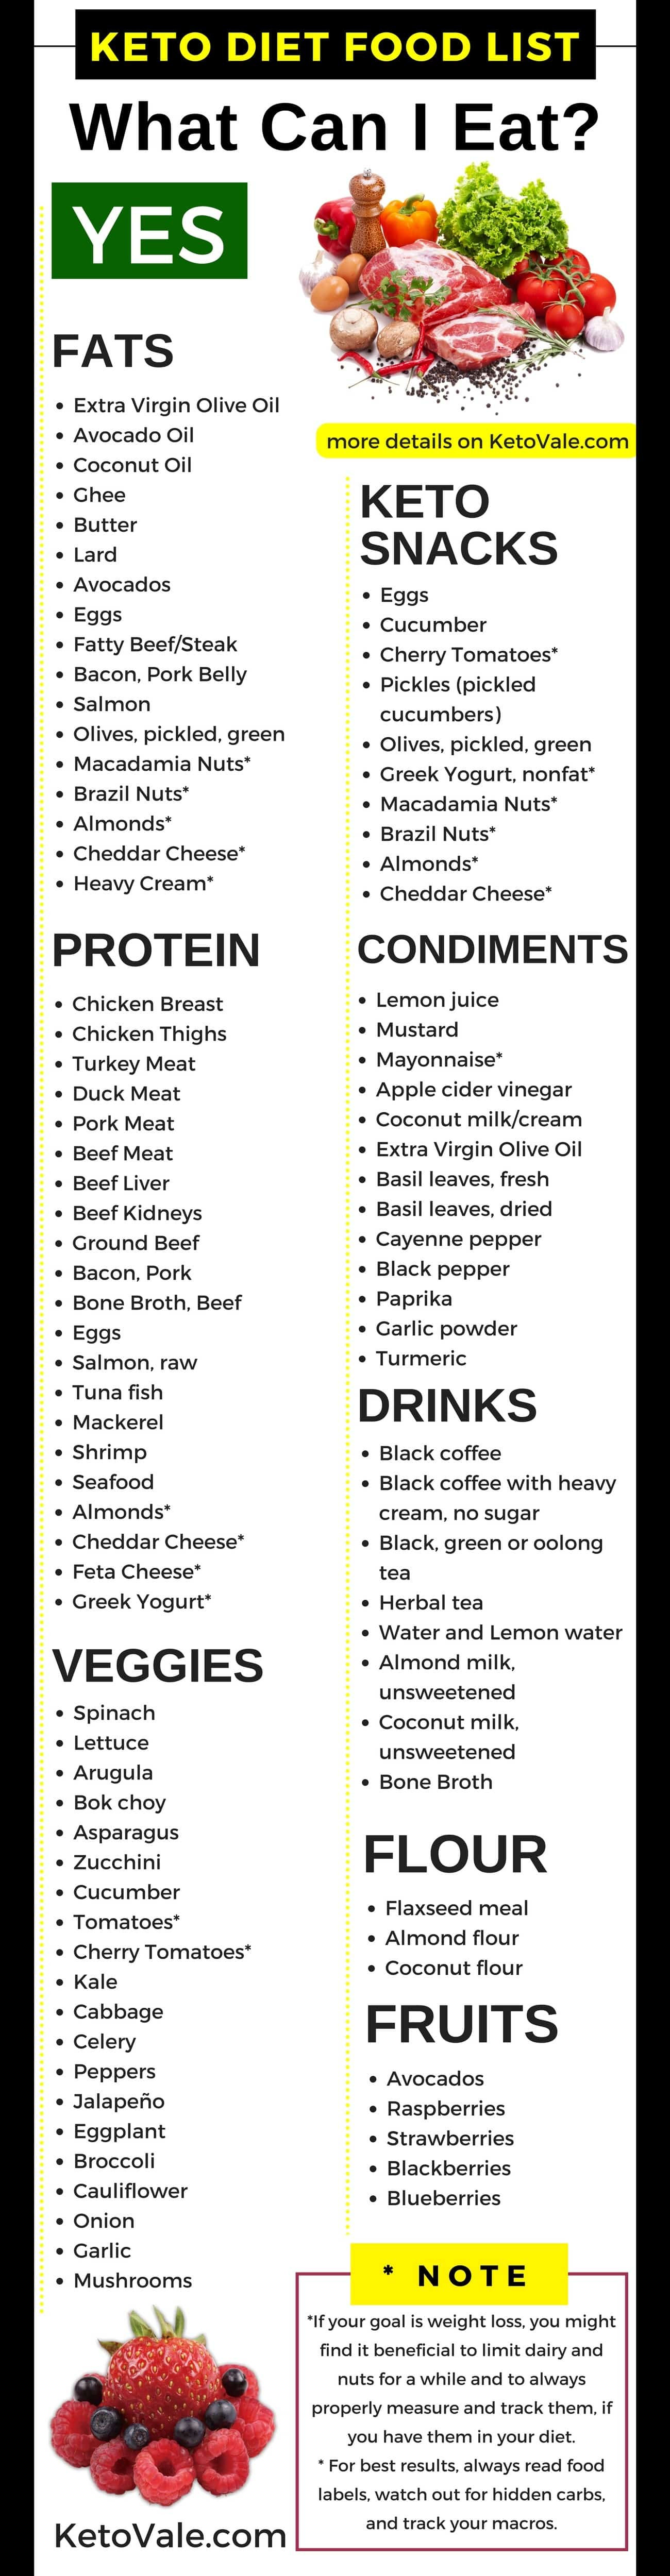 Keto Diet List Of Foods
 Keto Diet Food List Low Carb Grocery Shopping Guide PDF